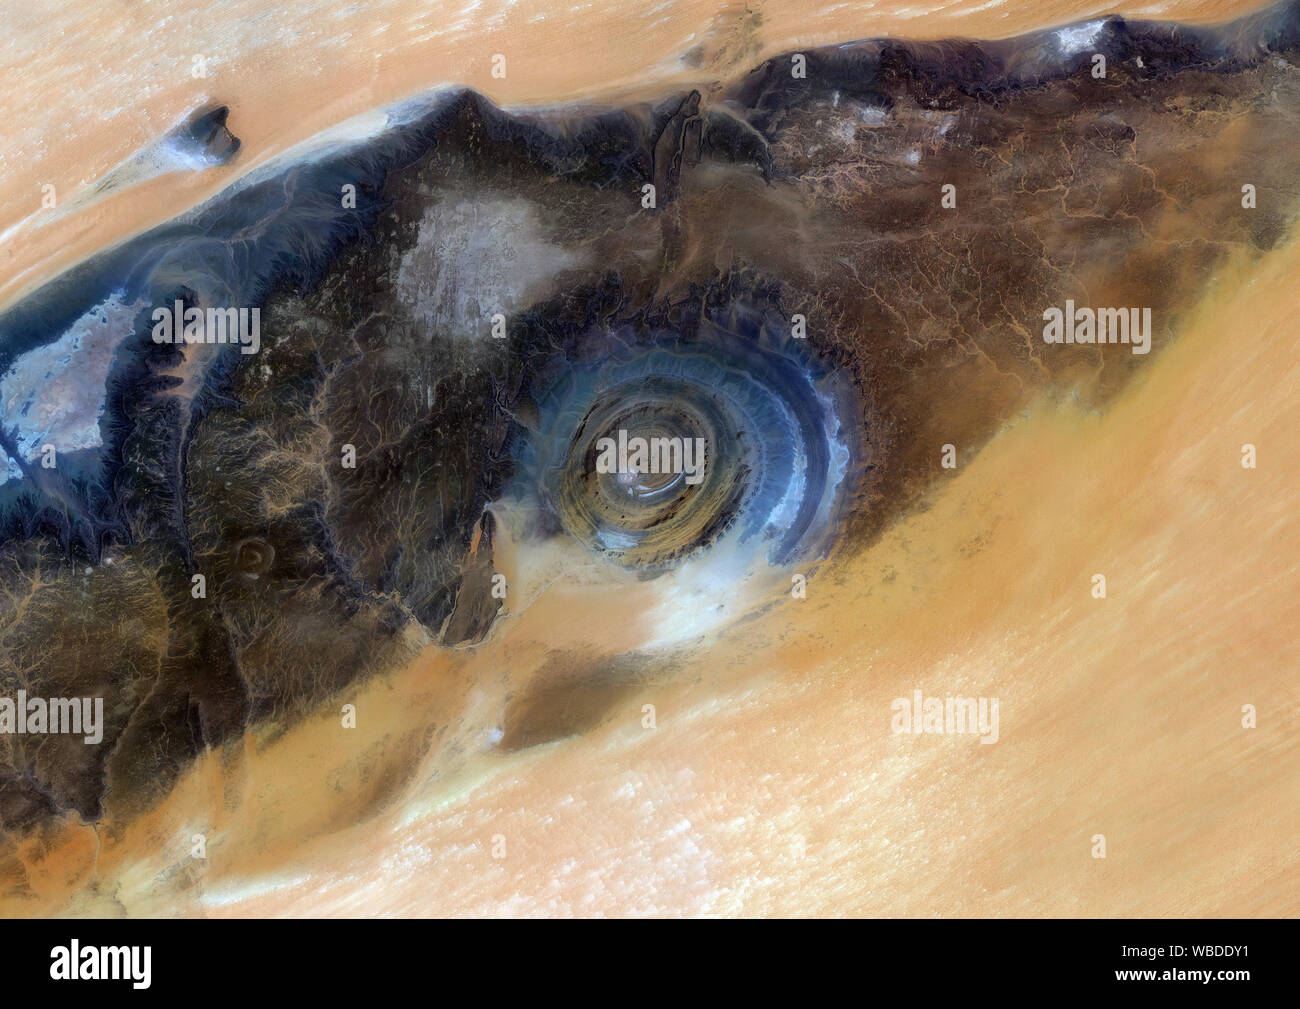 Color satellite image of the Richat Structure, Mauritania. This is a geological formation in the Maur Adrar Desert in the African country of Mauritania. Although it resembles an impact crater, the Richat Structure formed when a volcanic dome hardened and gradually eroded, exposing the onion-like layers of rock. This image was compiled from data acquired by Sentinel-2 & Landsat 8 satellites. Stock Photo